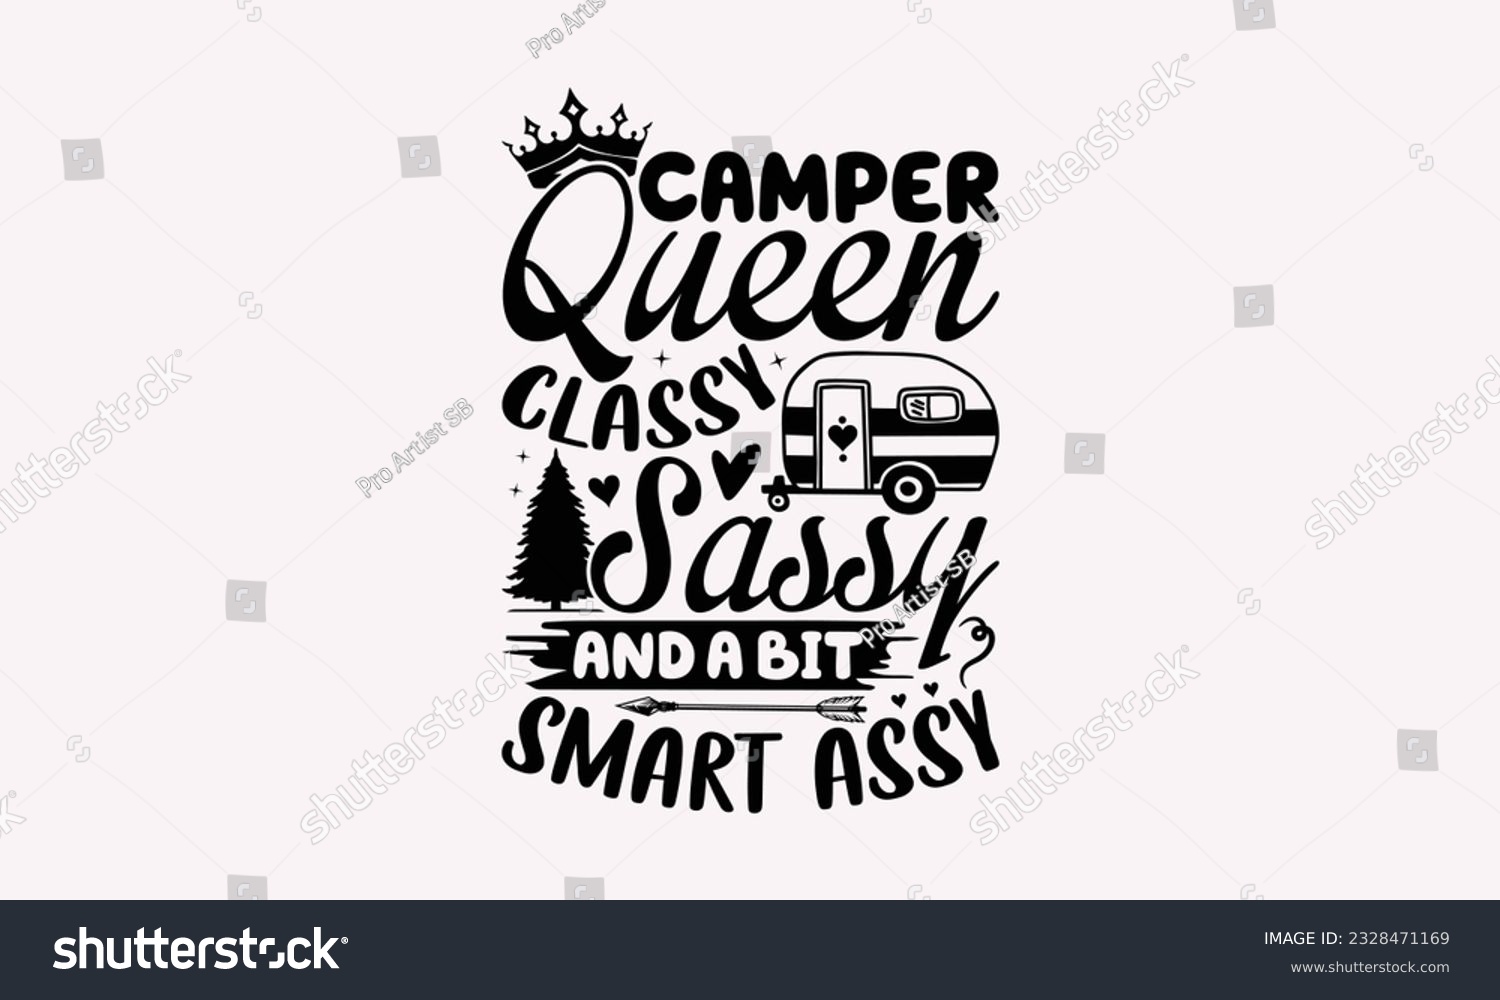 SVG of Camper queen classy sassy and a bit smart assy - Camping SVG Design, Print on T-Shirts, Mugs, Birthday Cards, Wall Decals, Stickers, Birthday Party Decorations, Cuts and More Use. svg